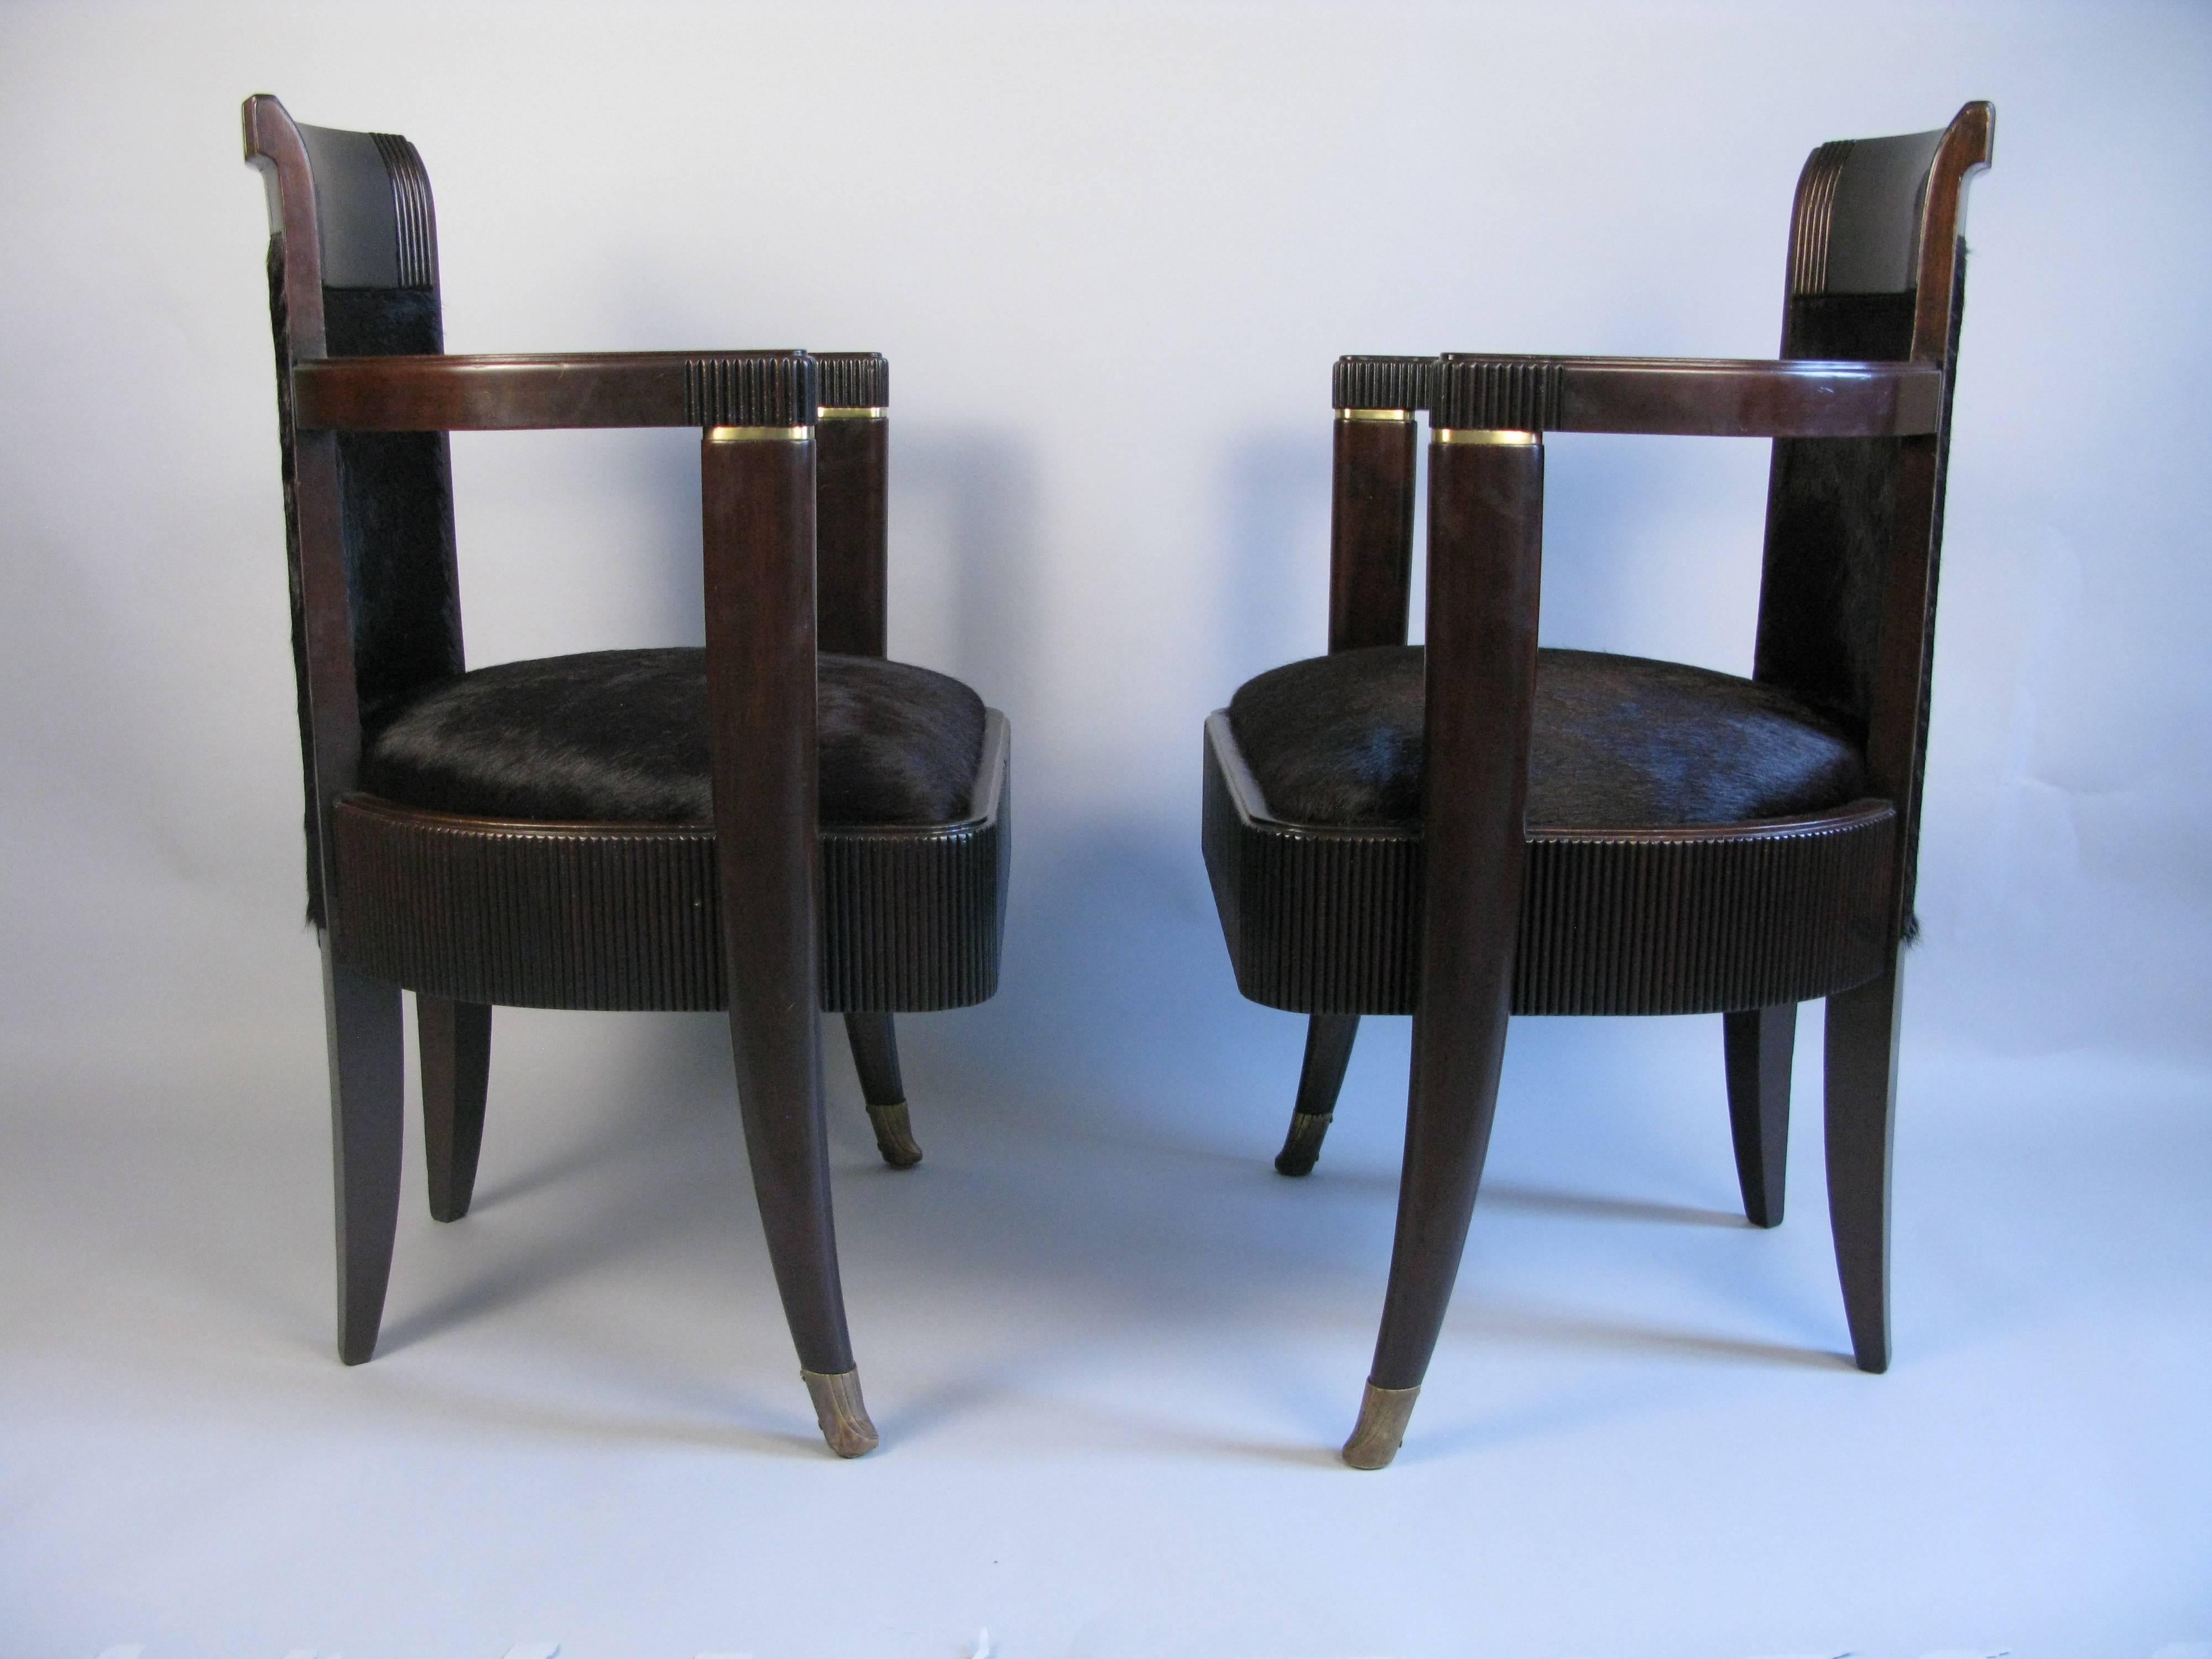 Woodwork Pair of Dining chairs from the French Luxury Liner S.S. Normandie 1935-1942